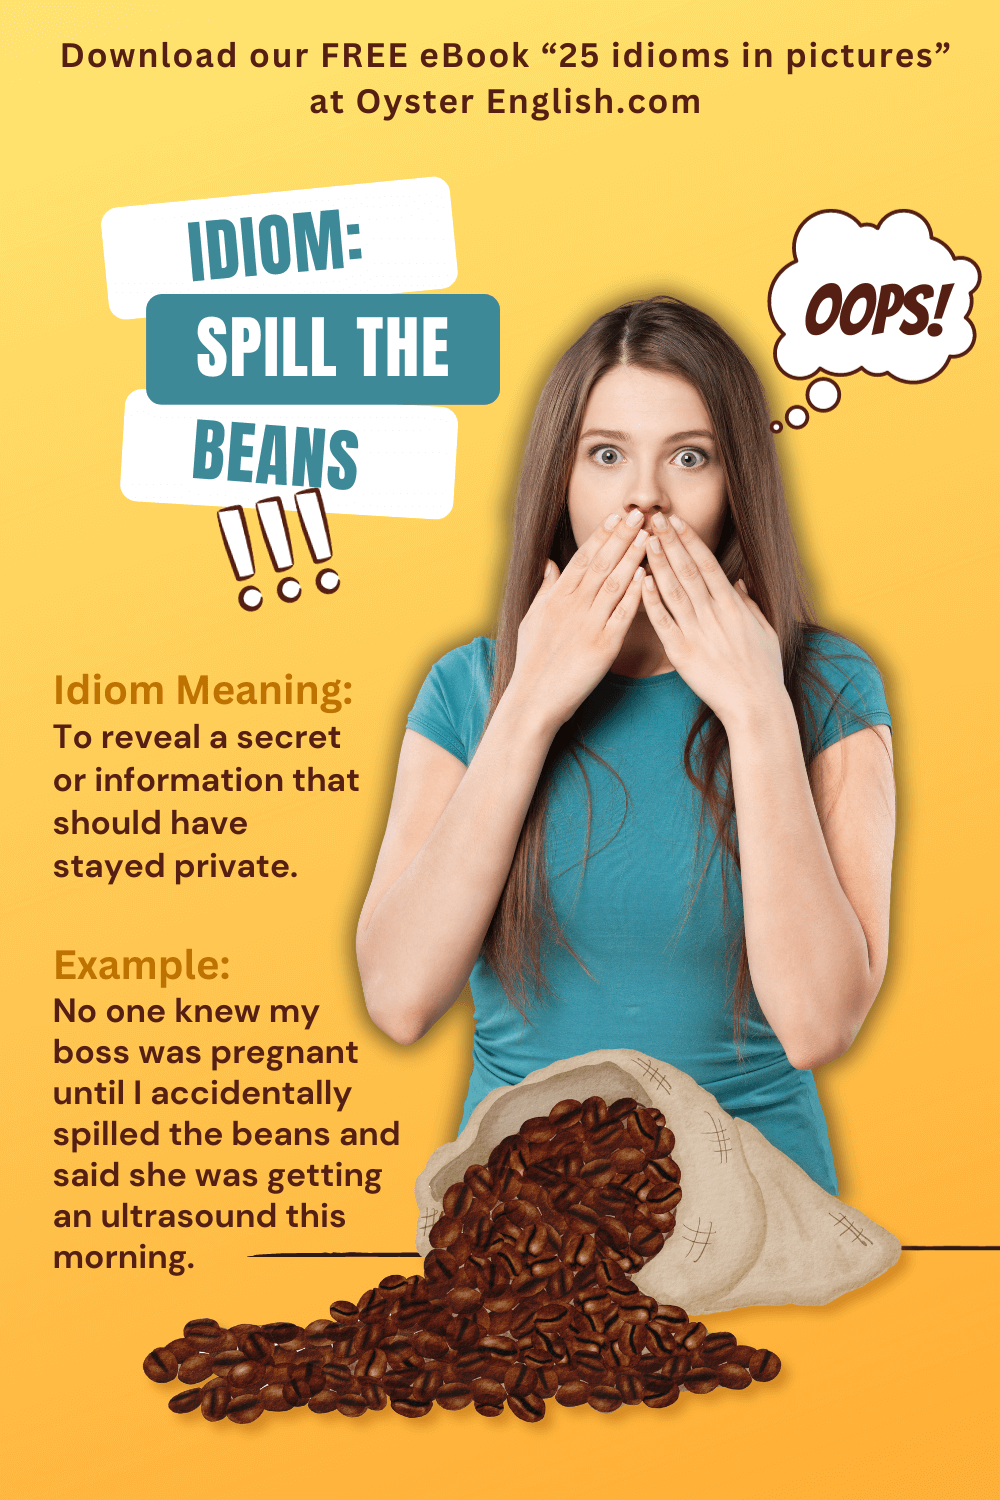 Hello everyone. Are there any other ways to say spill the beans